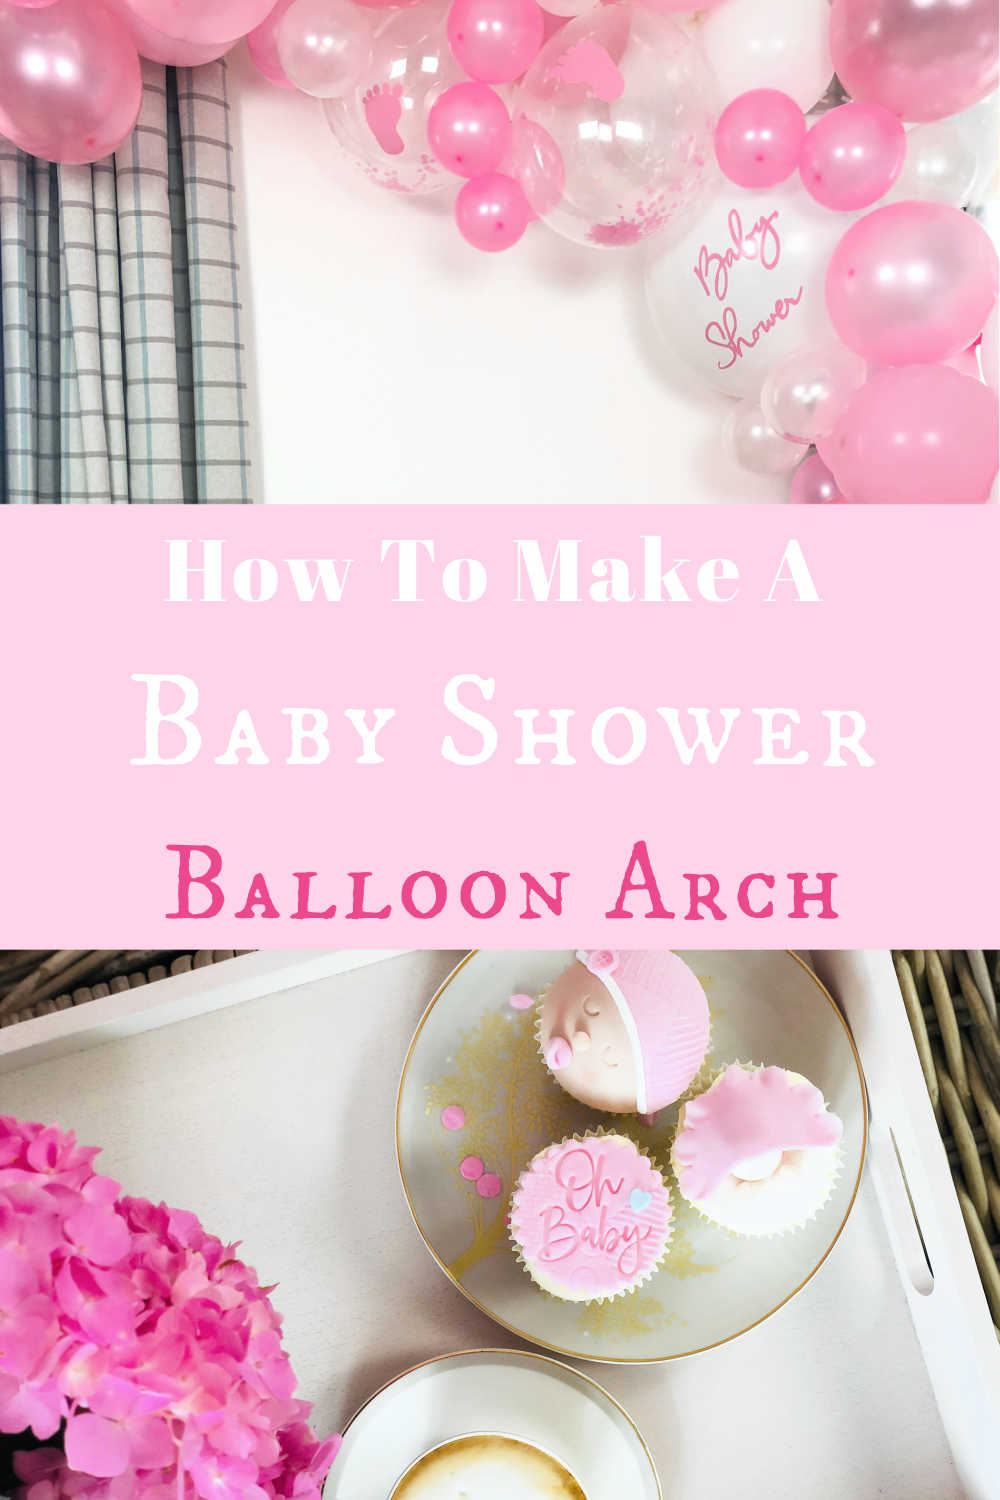 How to make a Baby Shower Balloon Arch